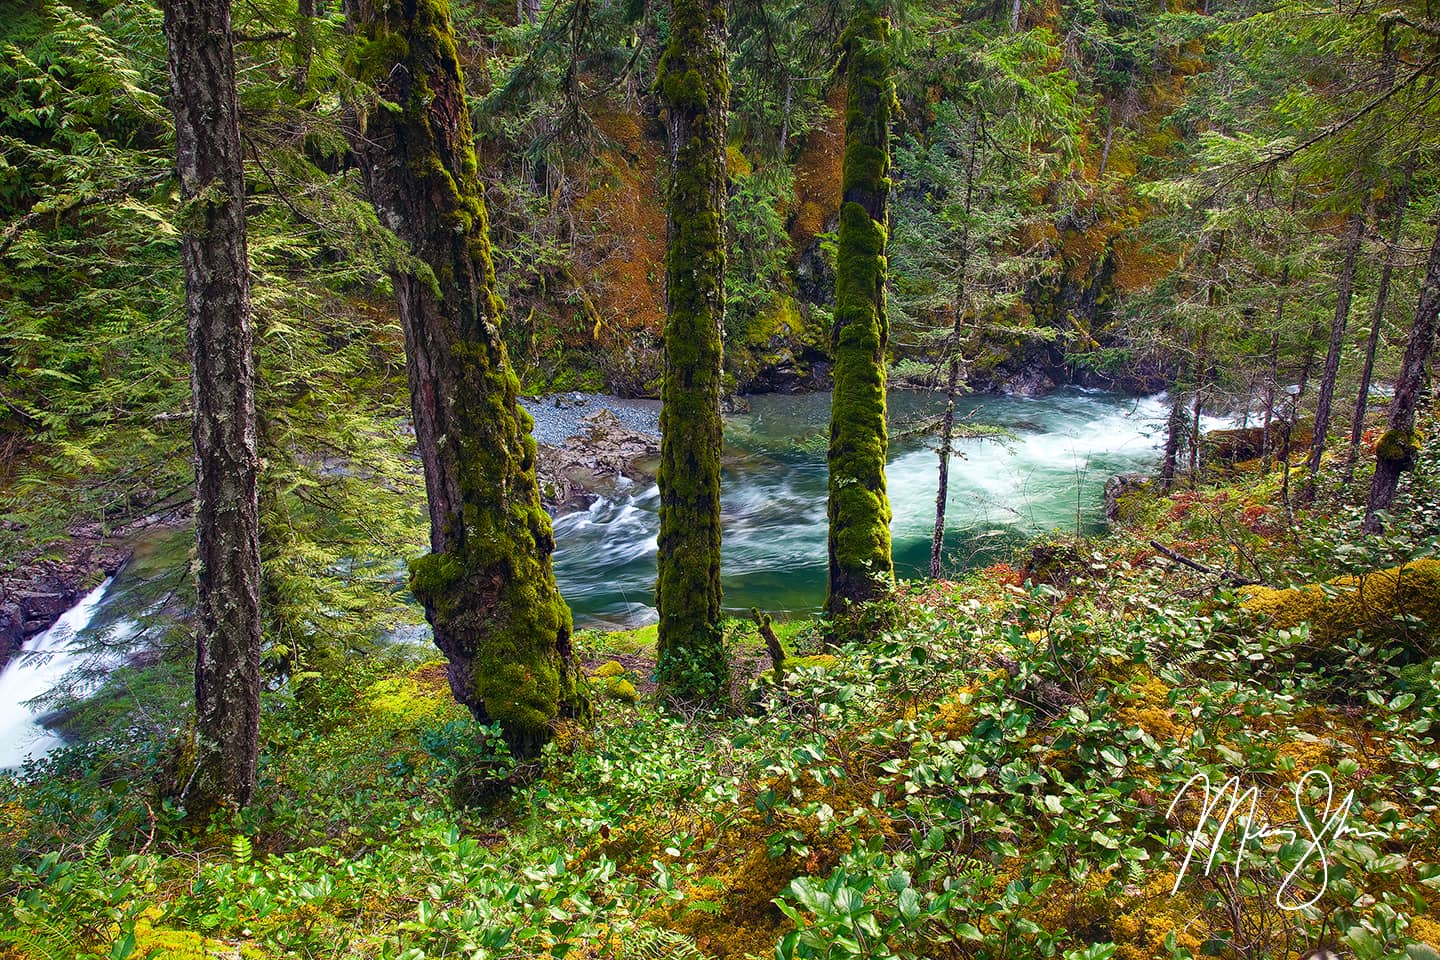 Open edition fine art print of Little Qualicum Falls Provincial Park from Mickey Shannon Photography. Location: Little Qualicum Falls Provincial Park, Vancouver Island, British Columbia, Canada